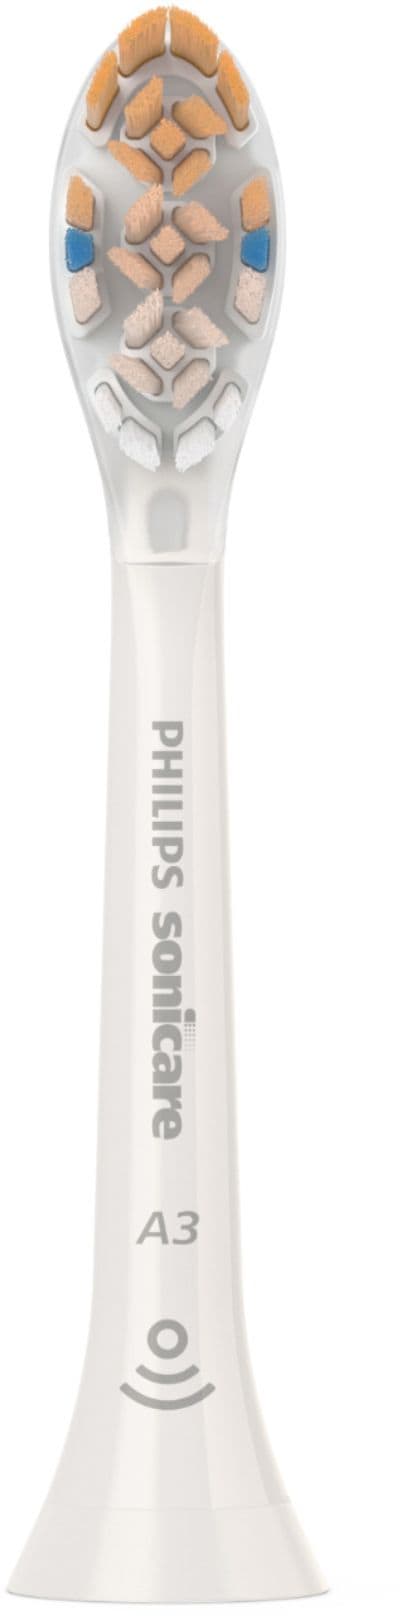 Philips Sonicare - Premium All-in-One (A3) Replacement Toothbrush Heads, (2-pack) - White_1